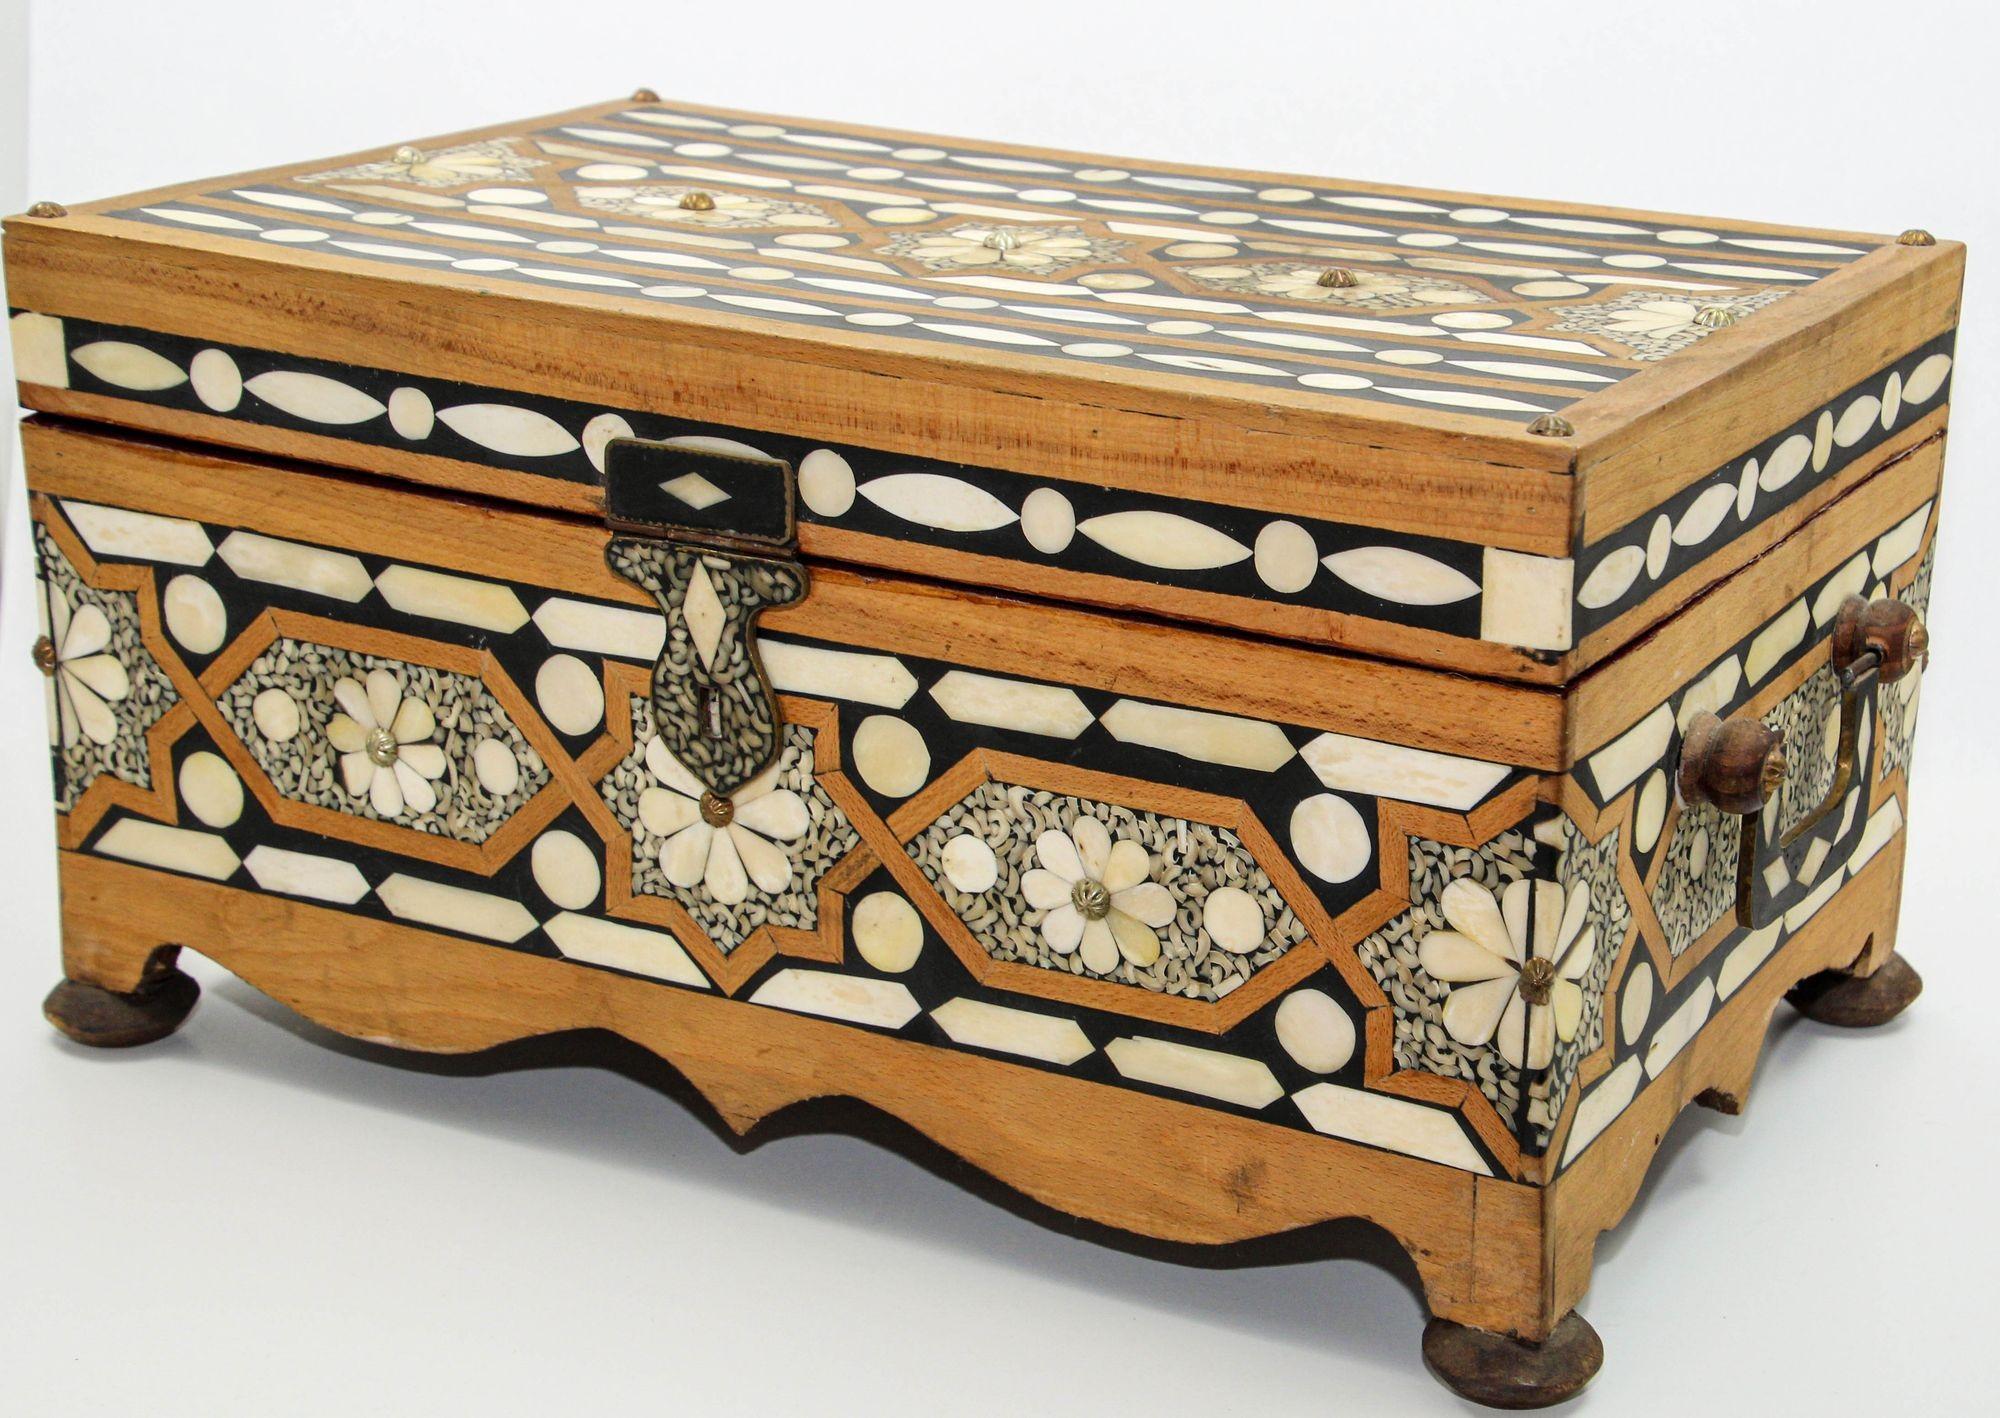 Moroccan Dowry Box Inlaid with White Camel Bone Rectangular Carved Wood Trunk For Sale 3